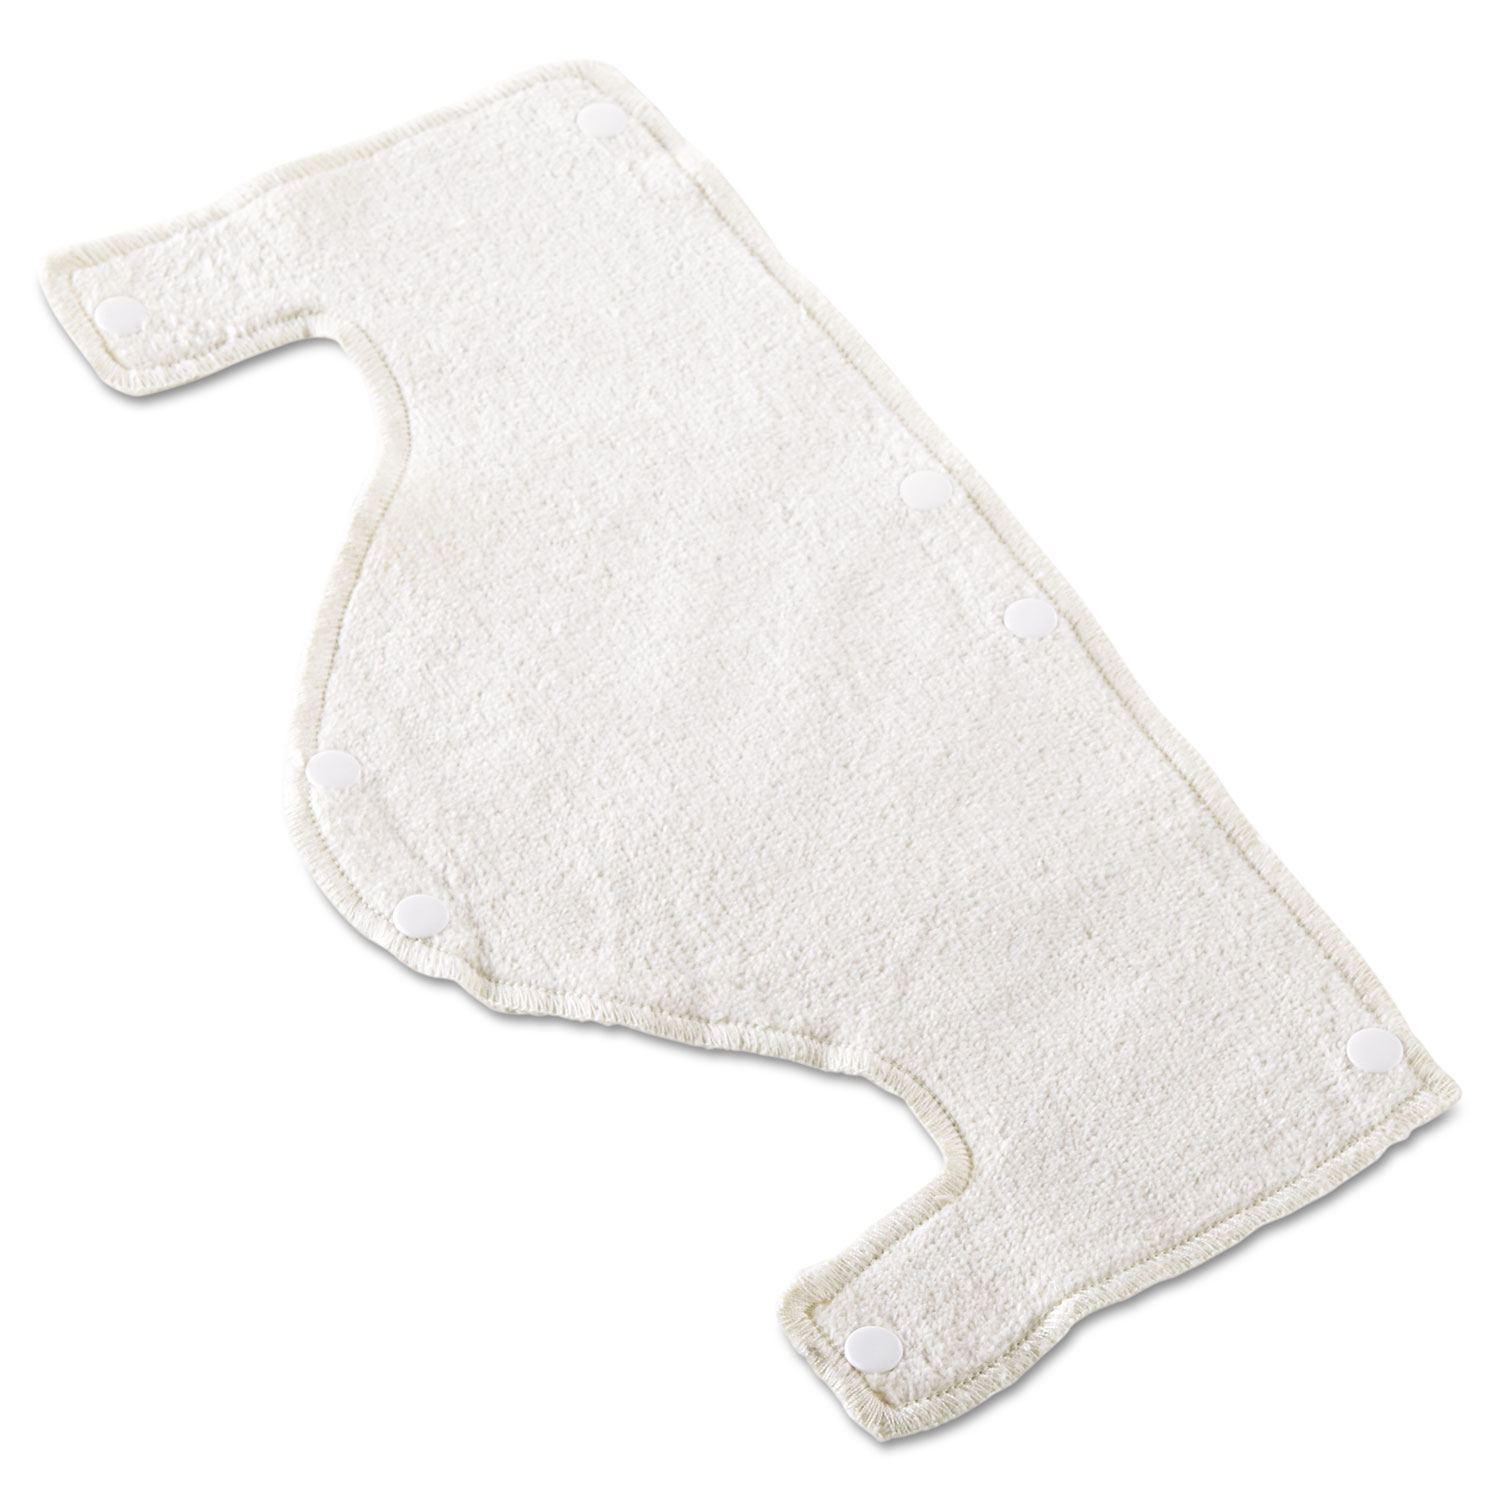 Hard-Hat Sweatband, Cotton, White, One Size Fits All, 10/Pack